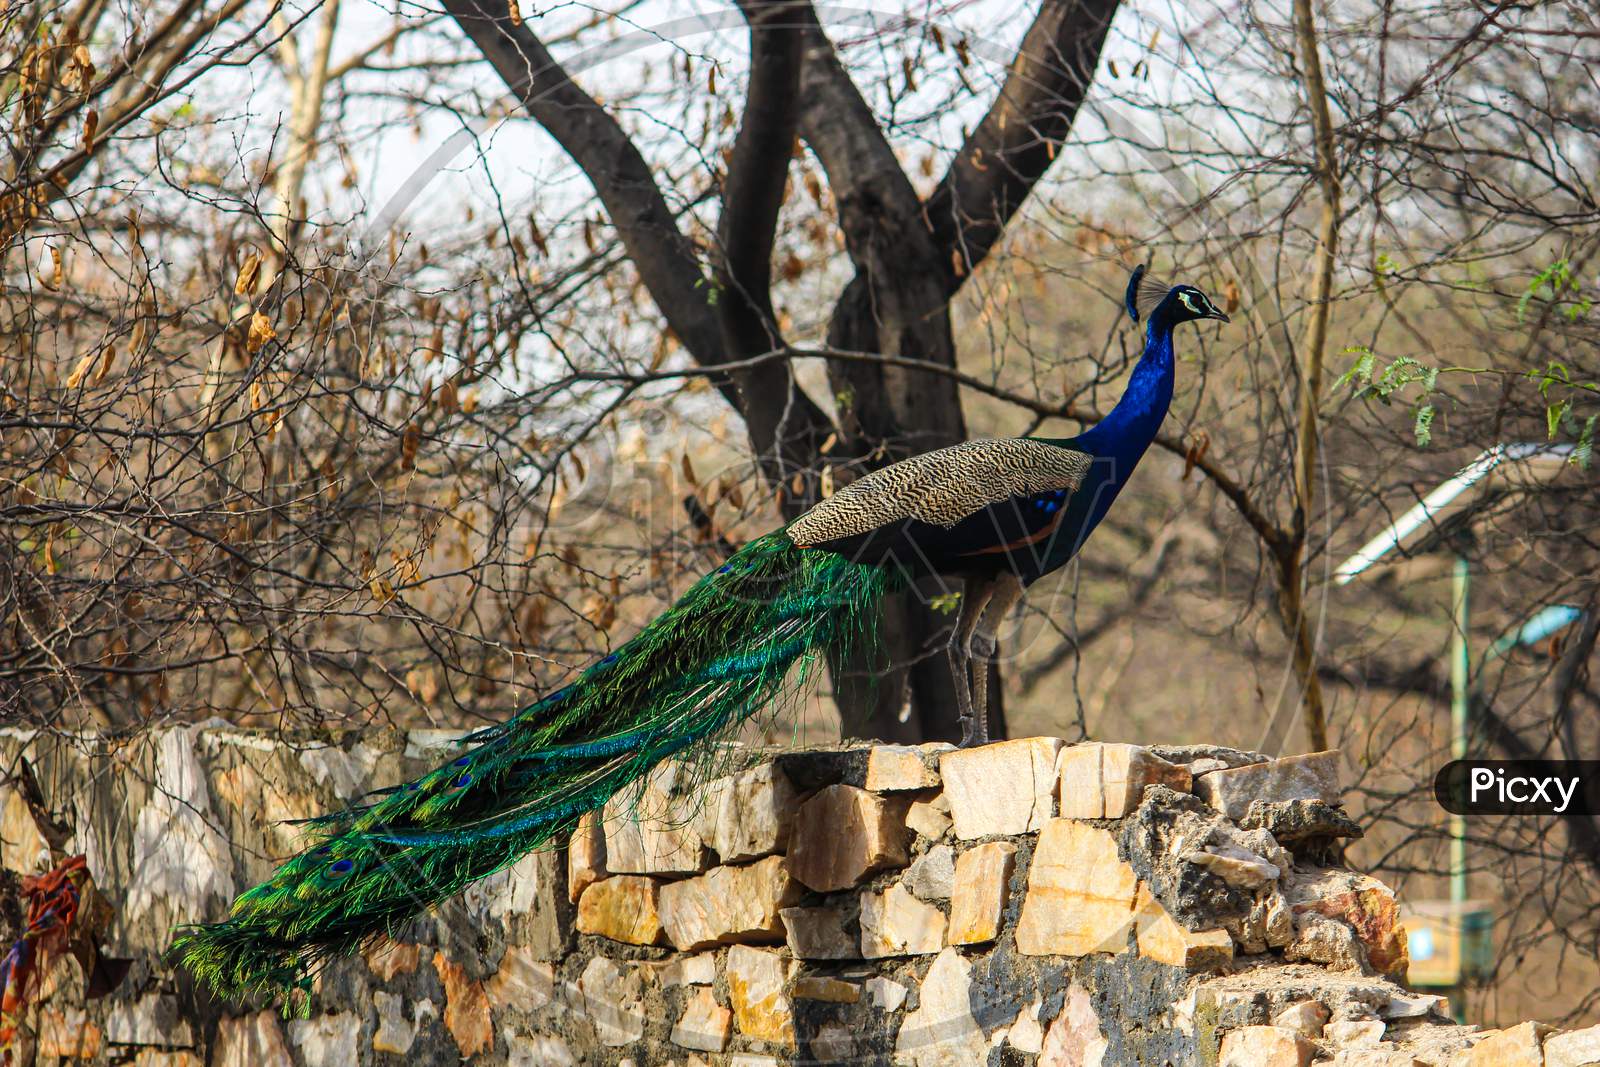 Pavo is a genus of two species in the pheasant family. The two species, along with the Congo peacock, are known as peafowl